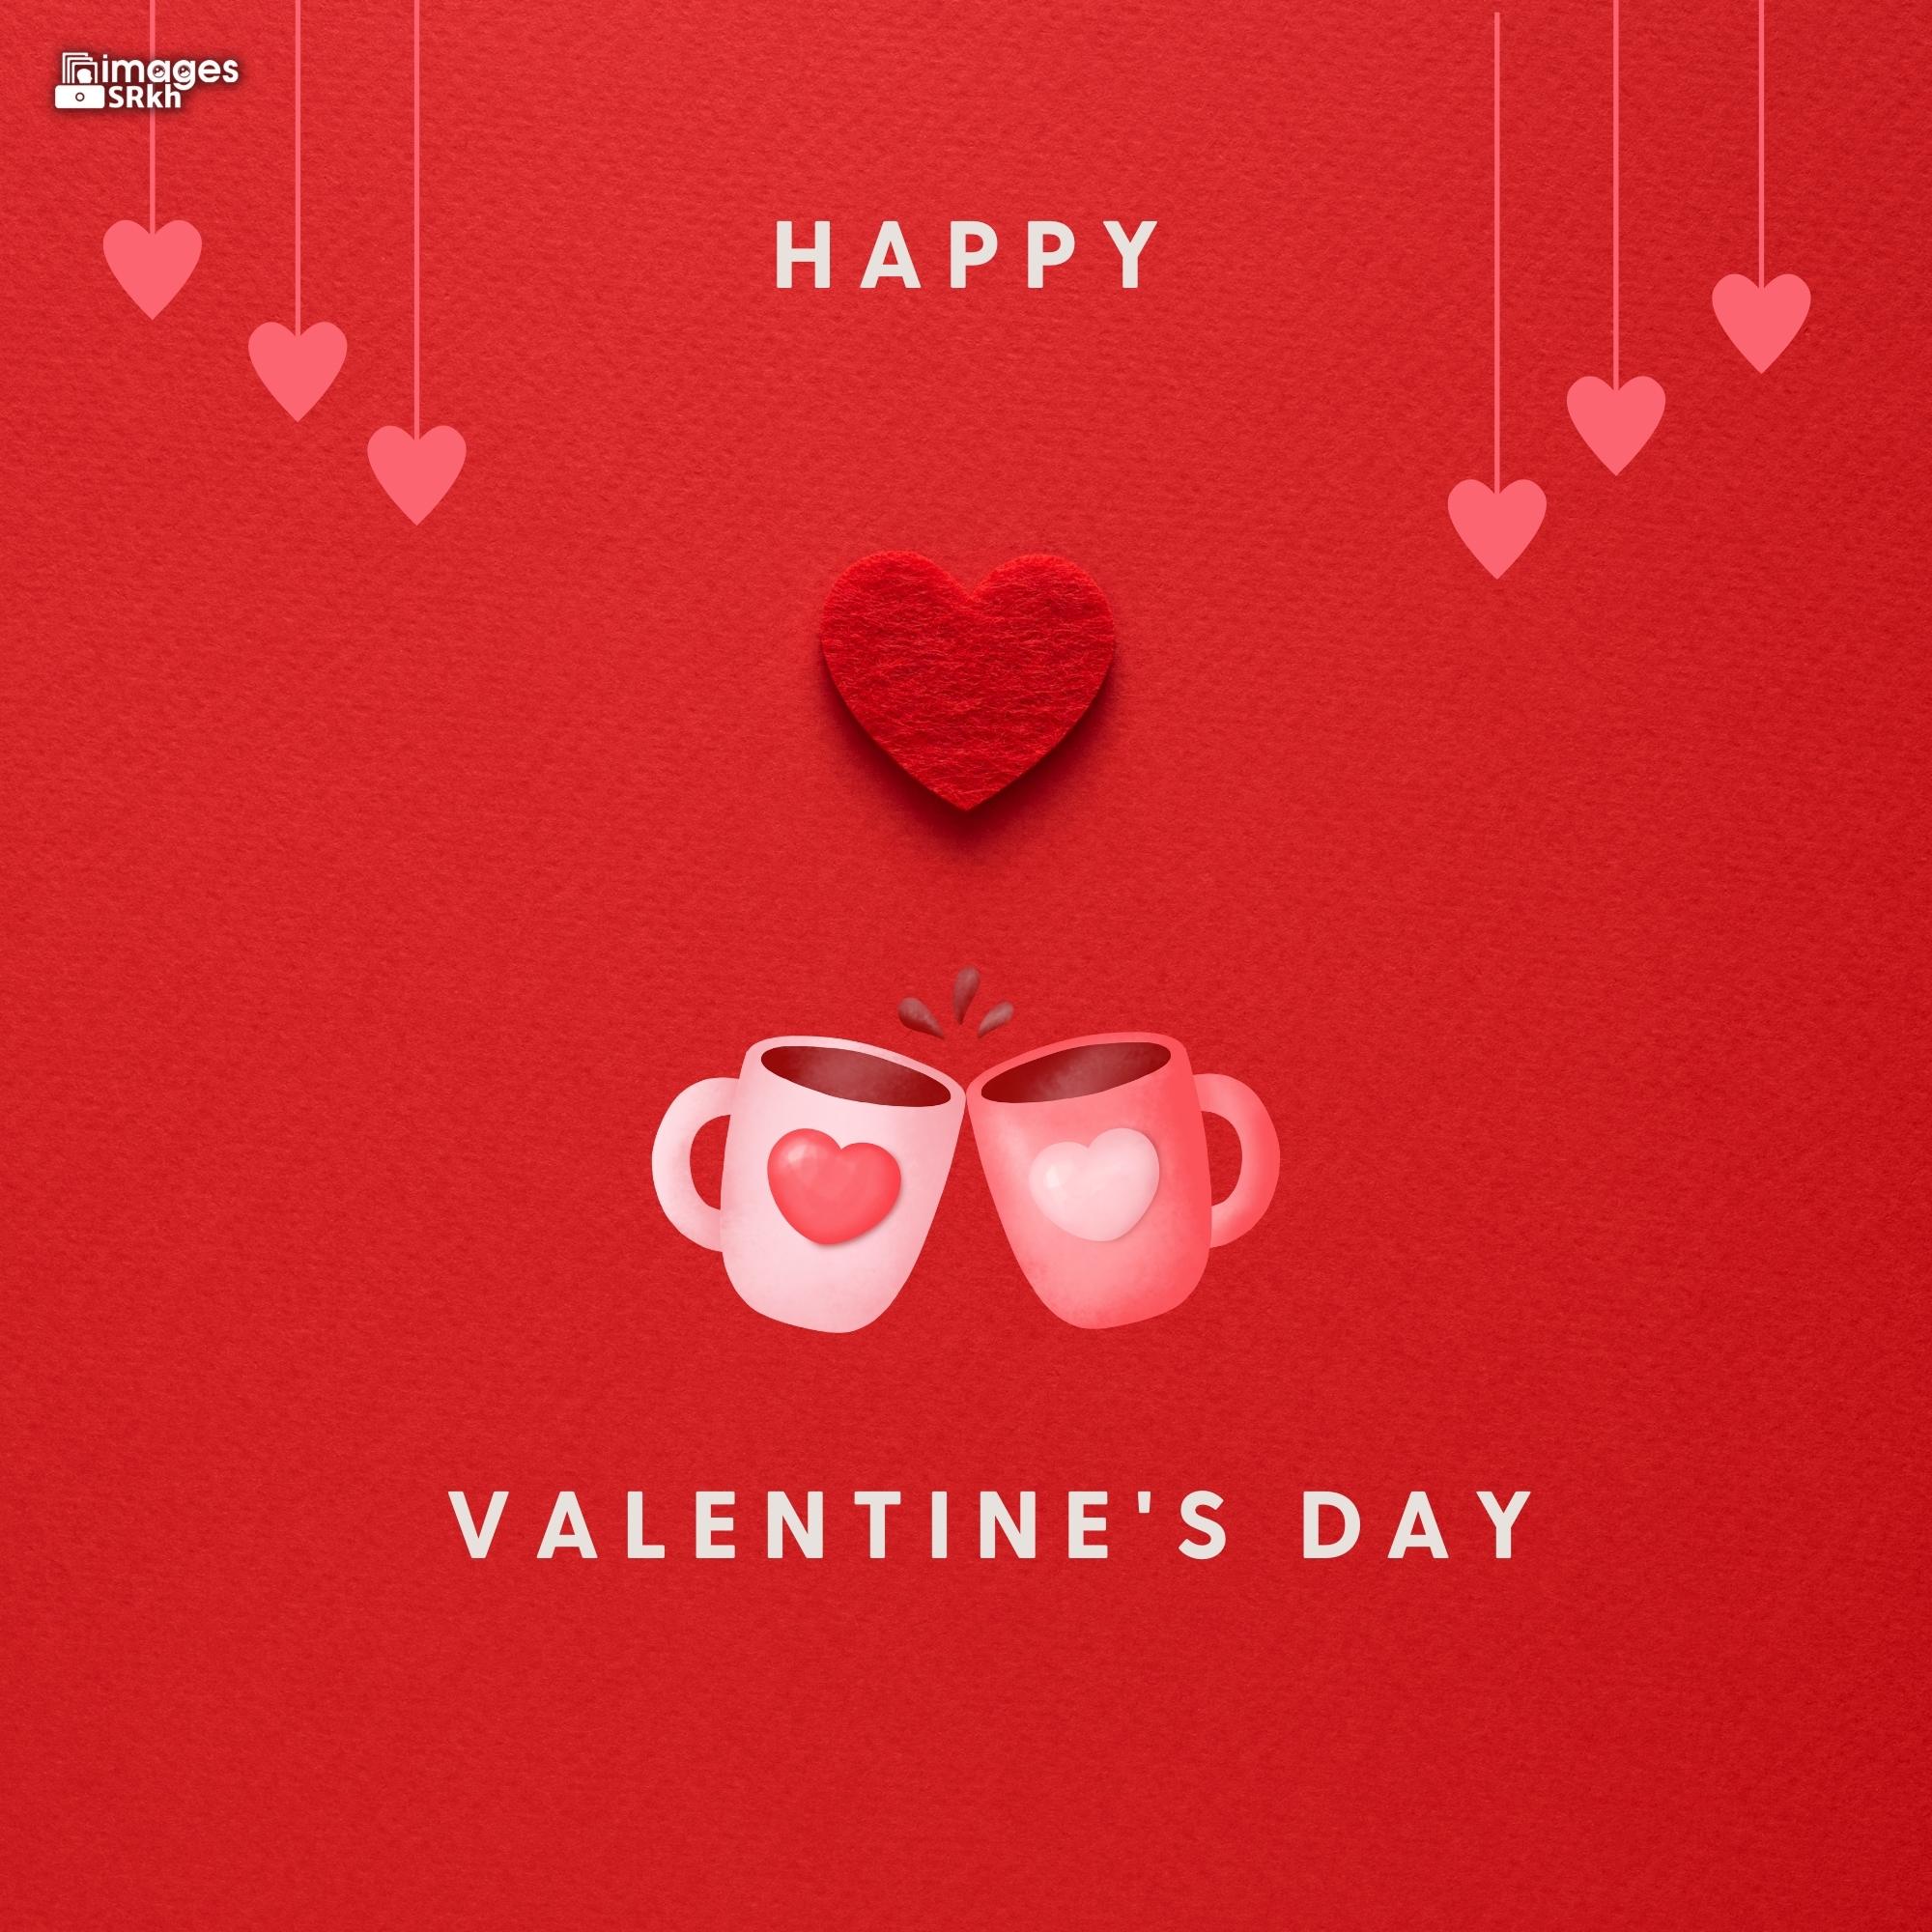 Happy Valentines Day | 444 | PREMIUM IMAGES | Wishes for Love